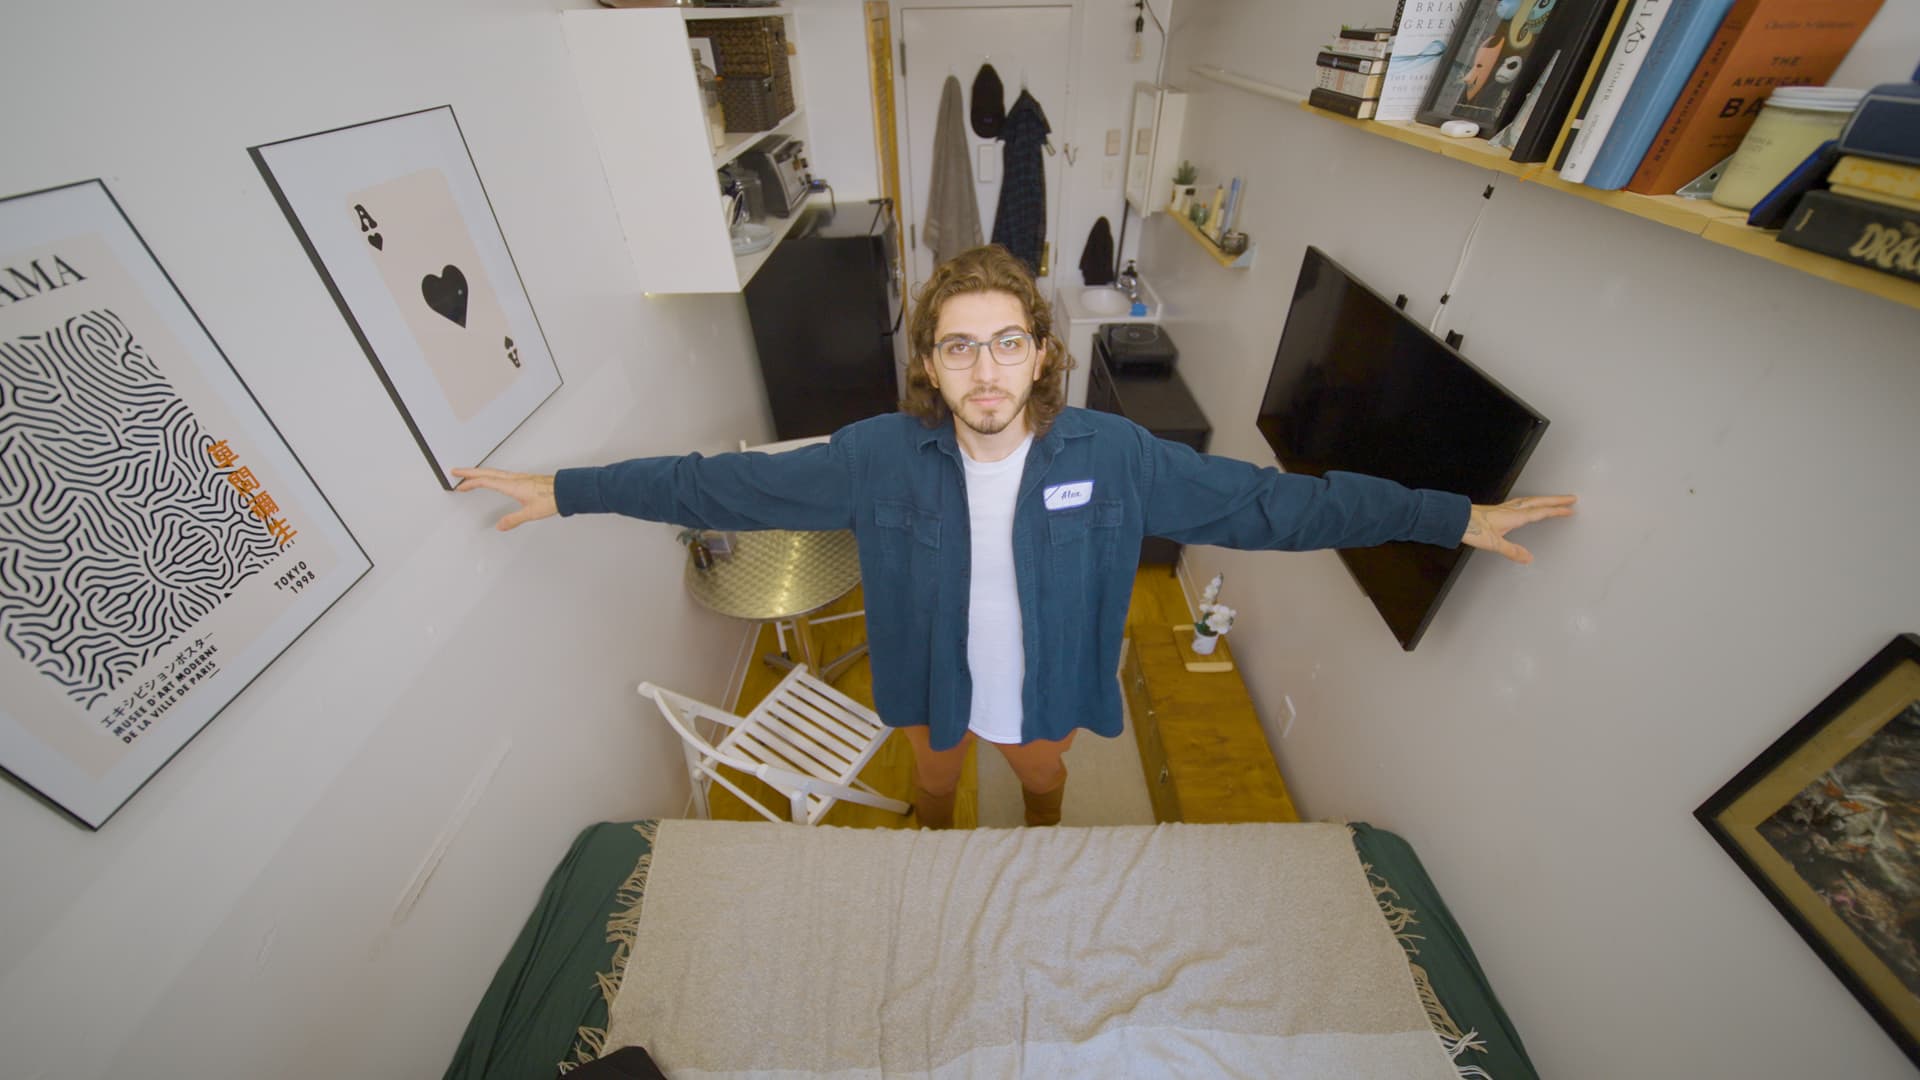 This 23-year-old pays ,100 a month to rent a 95 sq ft NYC apartment